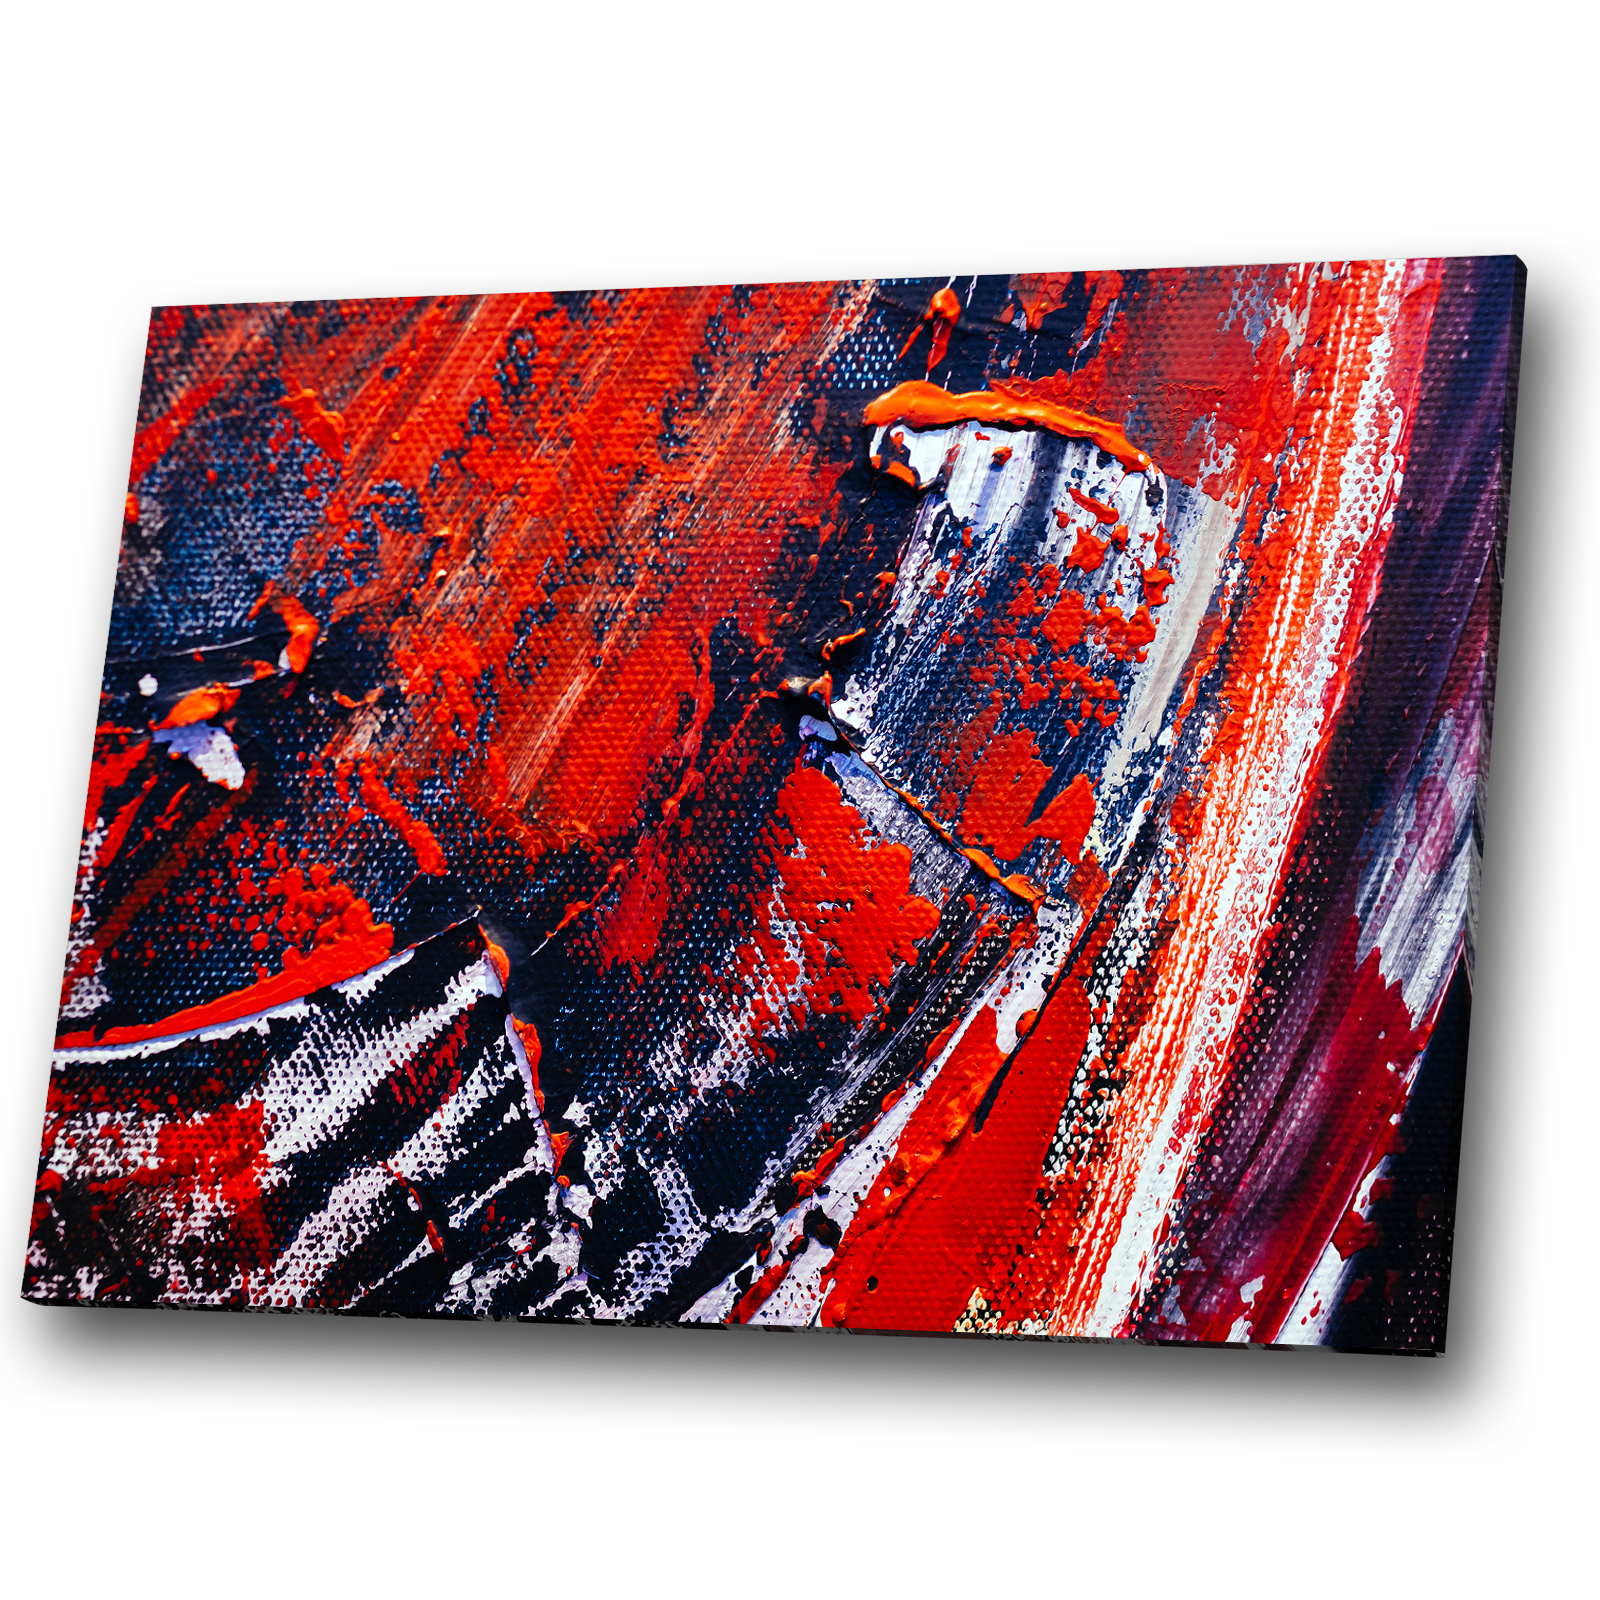 AB1019 Orange Red Modern Retro Abstract Canvas Wall Art Large Picture Prints